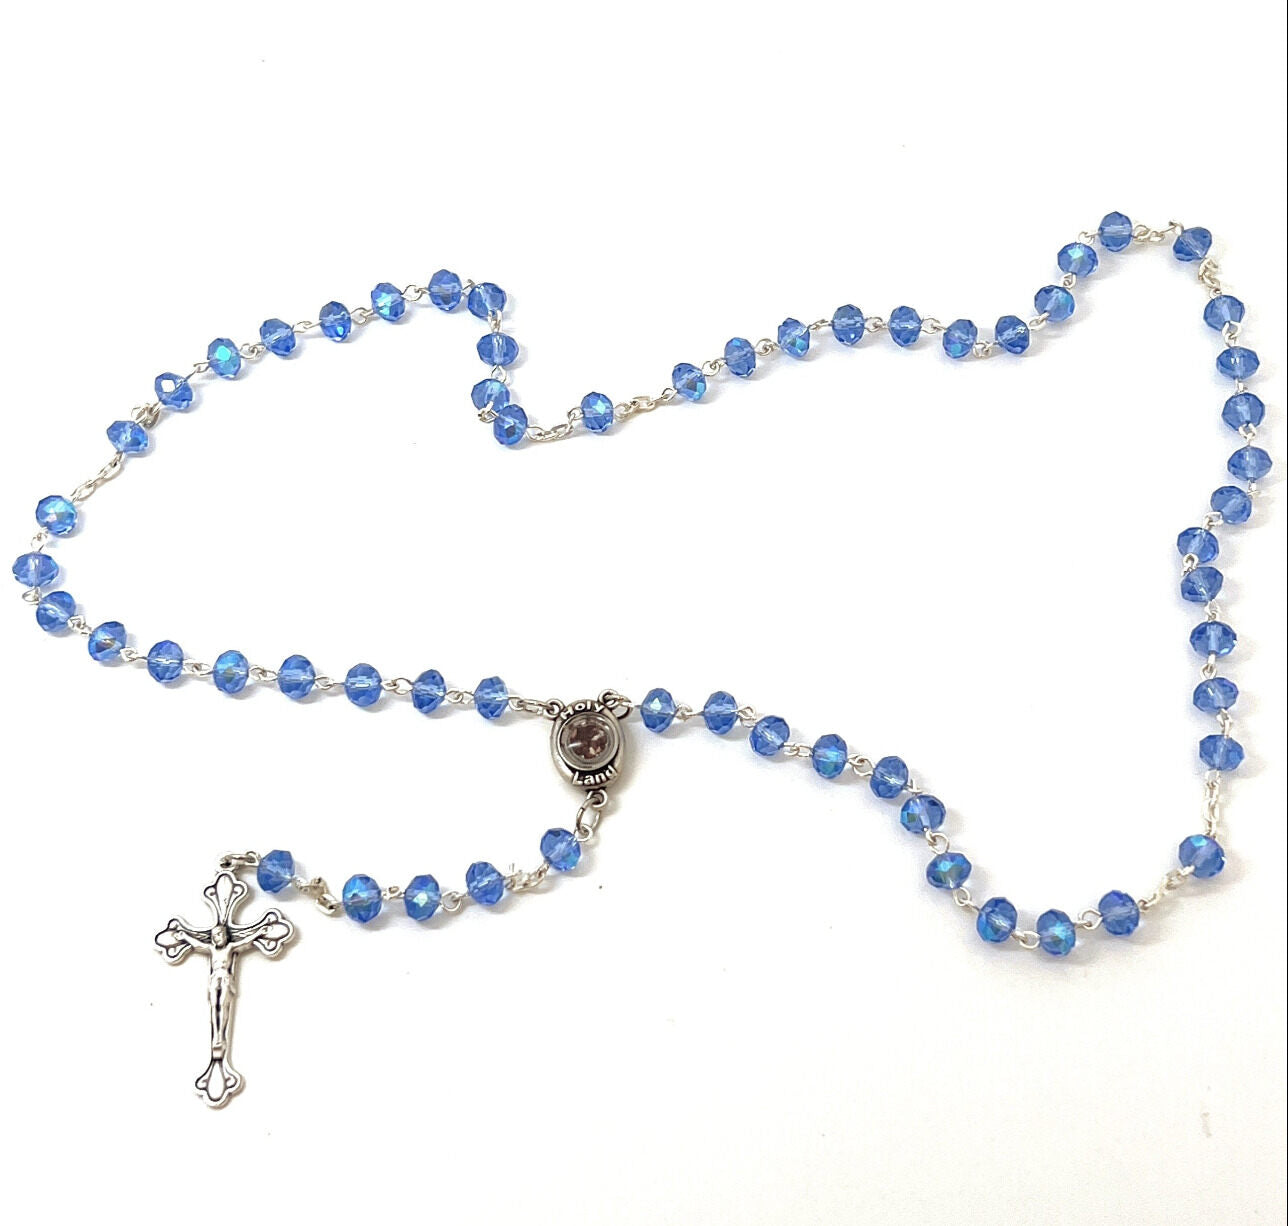 Rosary with Blue Crystal Beads, 2" Crucifix with Metal Chain, Made in Bethlehem